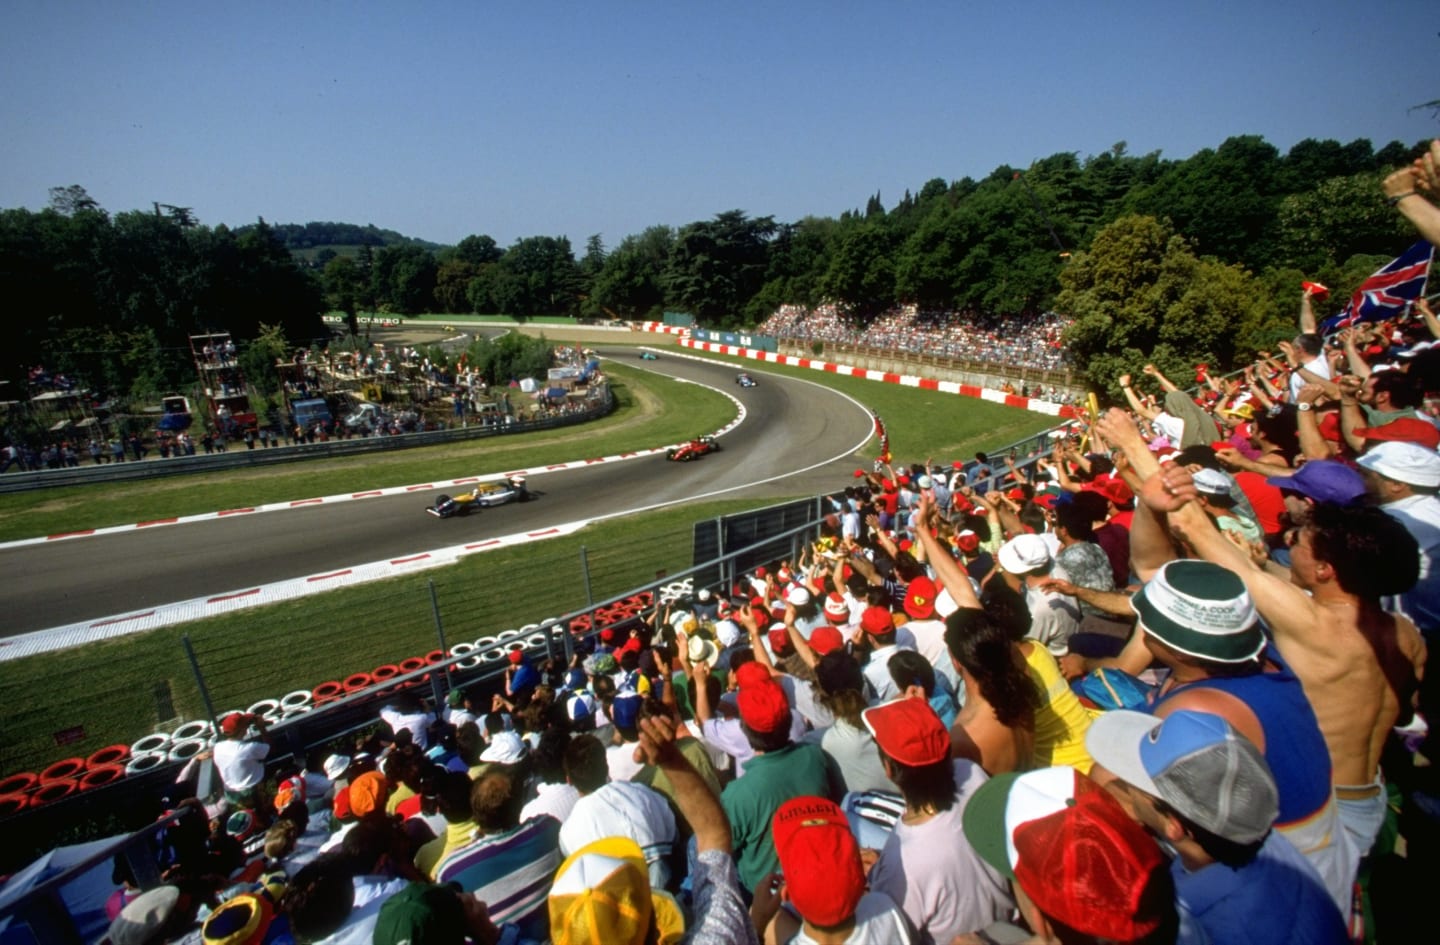 1992:  General view of the crowd watching the race during the San Marino Grand Prix at the Imola